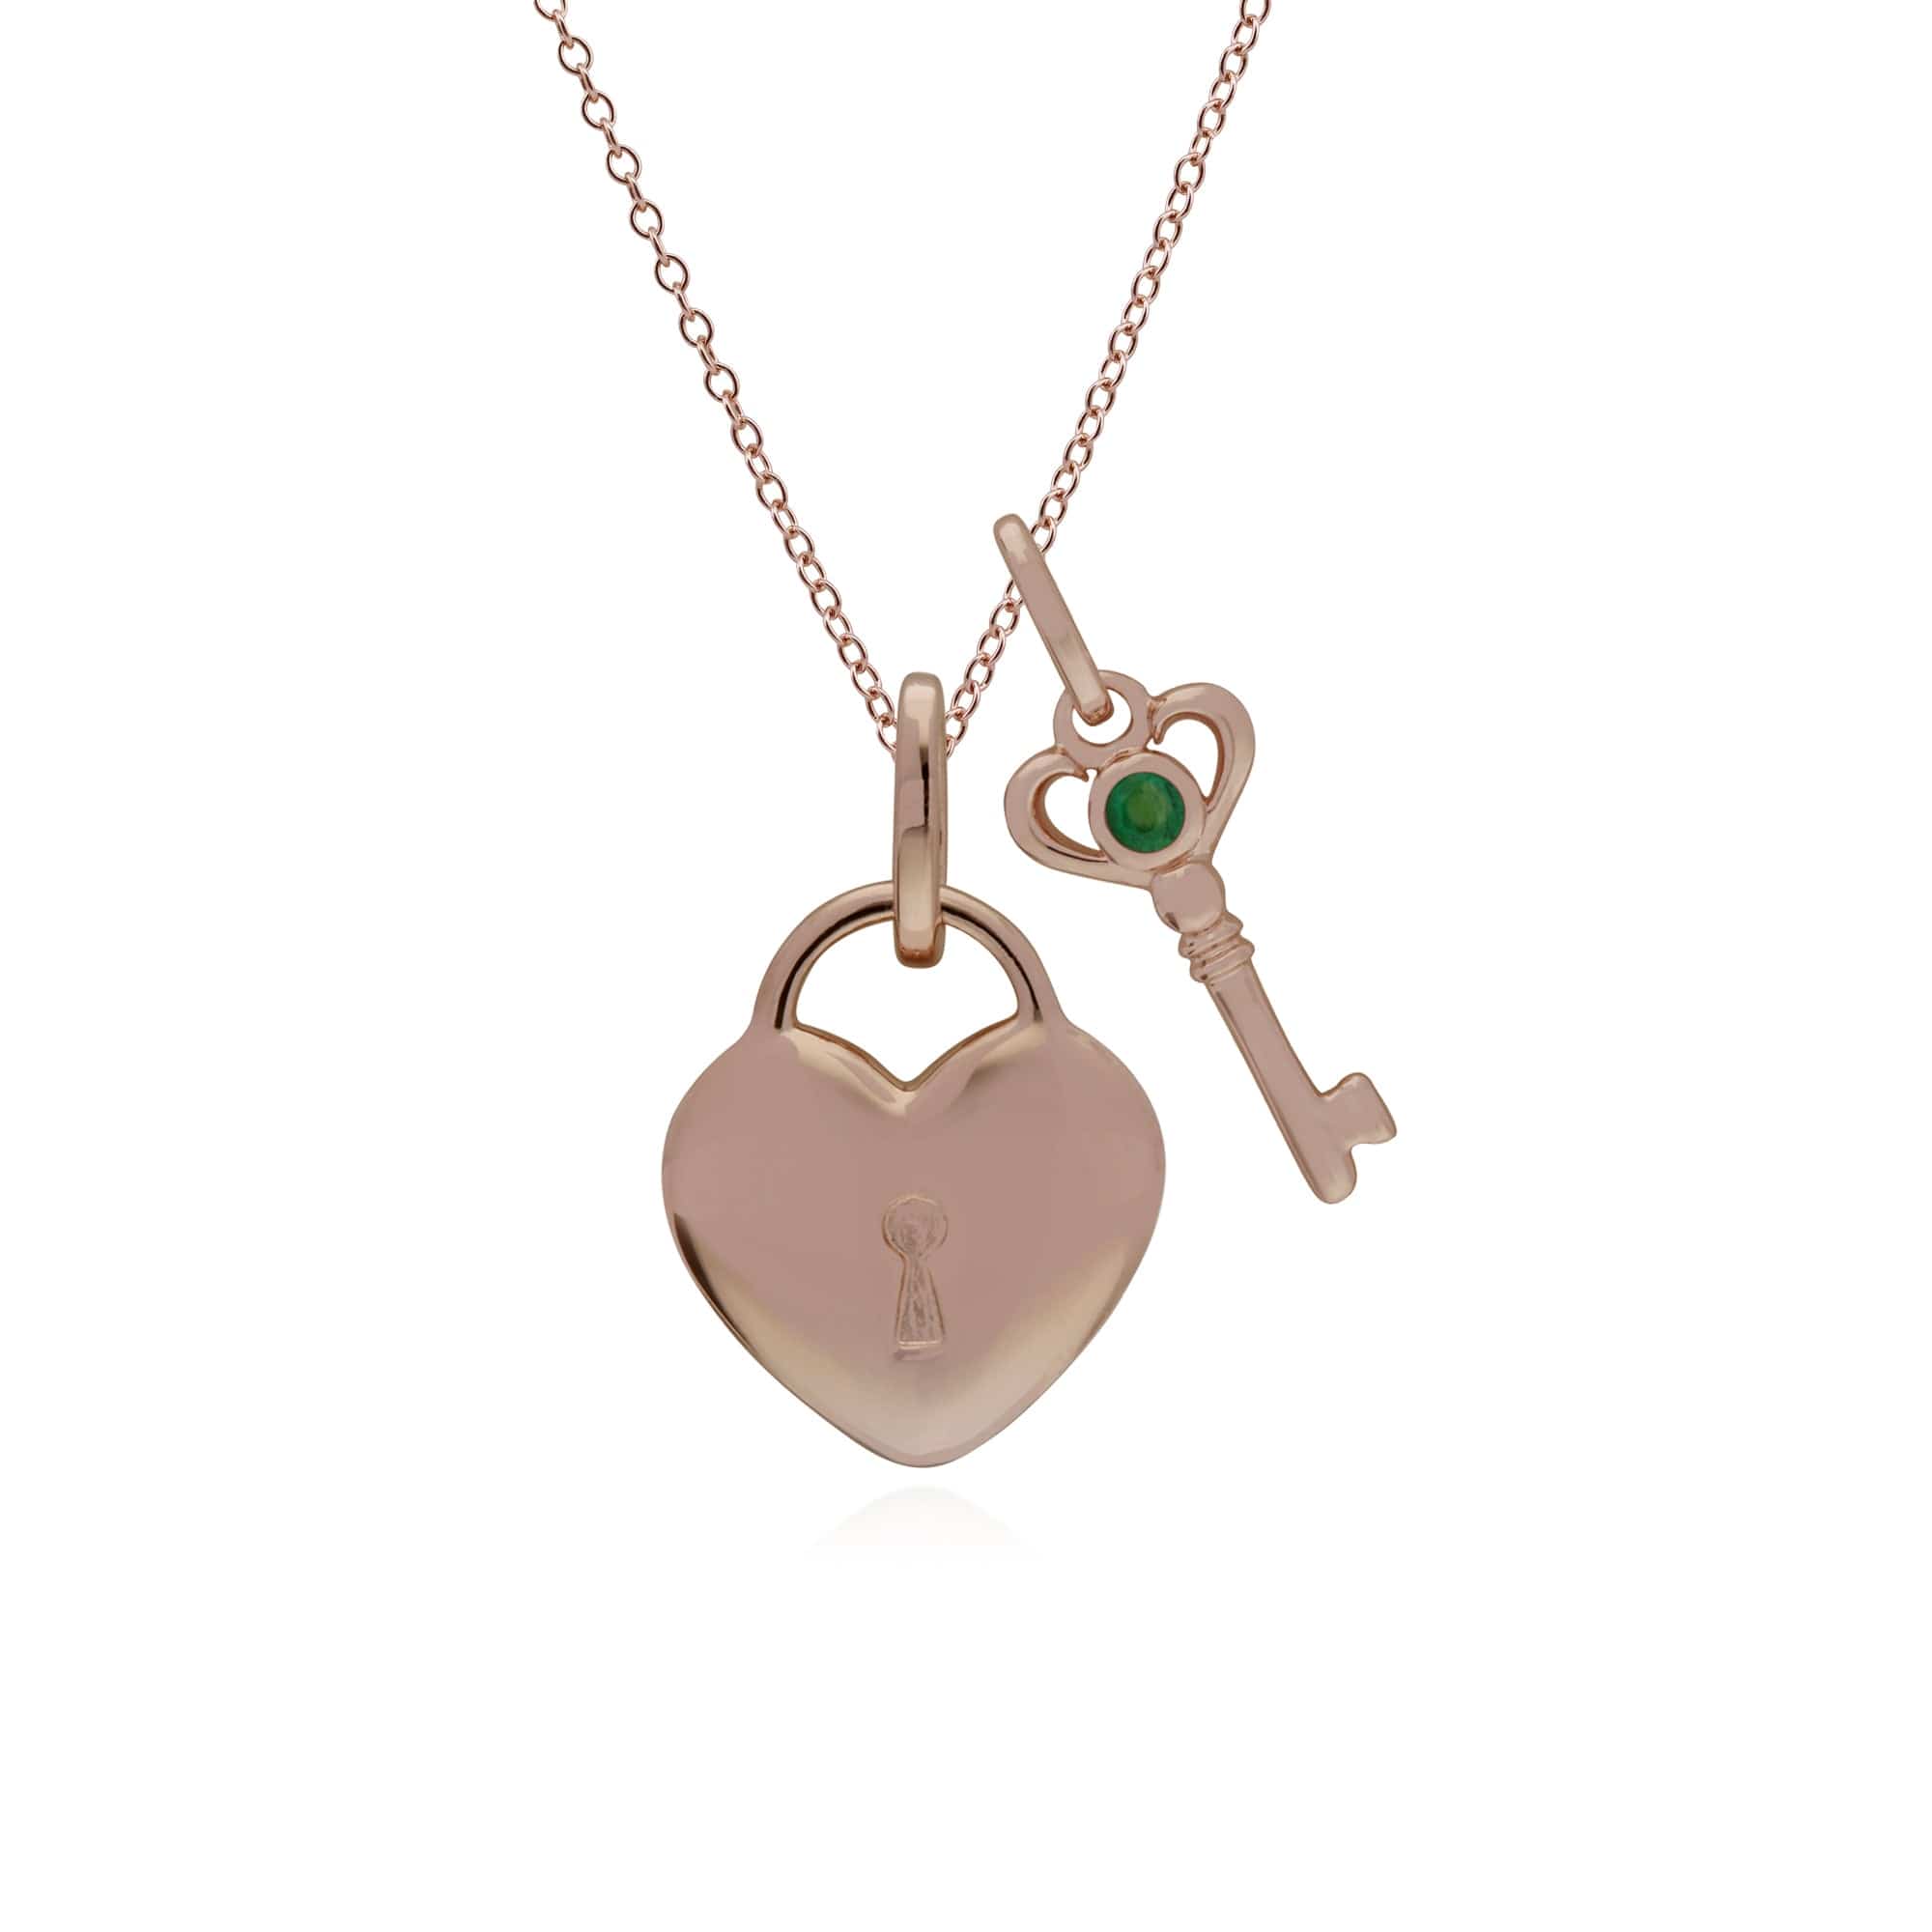 270P026303925-270P026901925 Classic Heart Lock Pendant & Emerald Key Charm in Rose Gold Plated 925 Sterling Silver 1